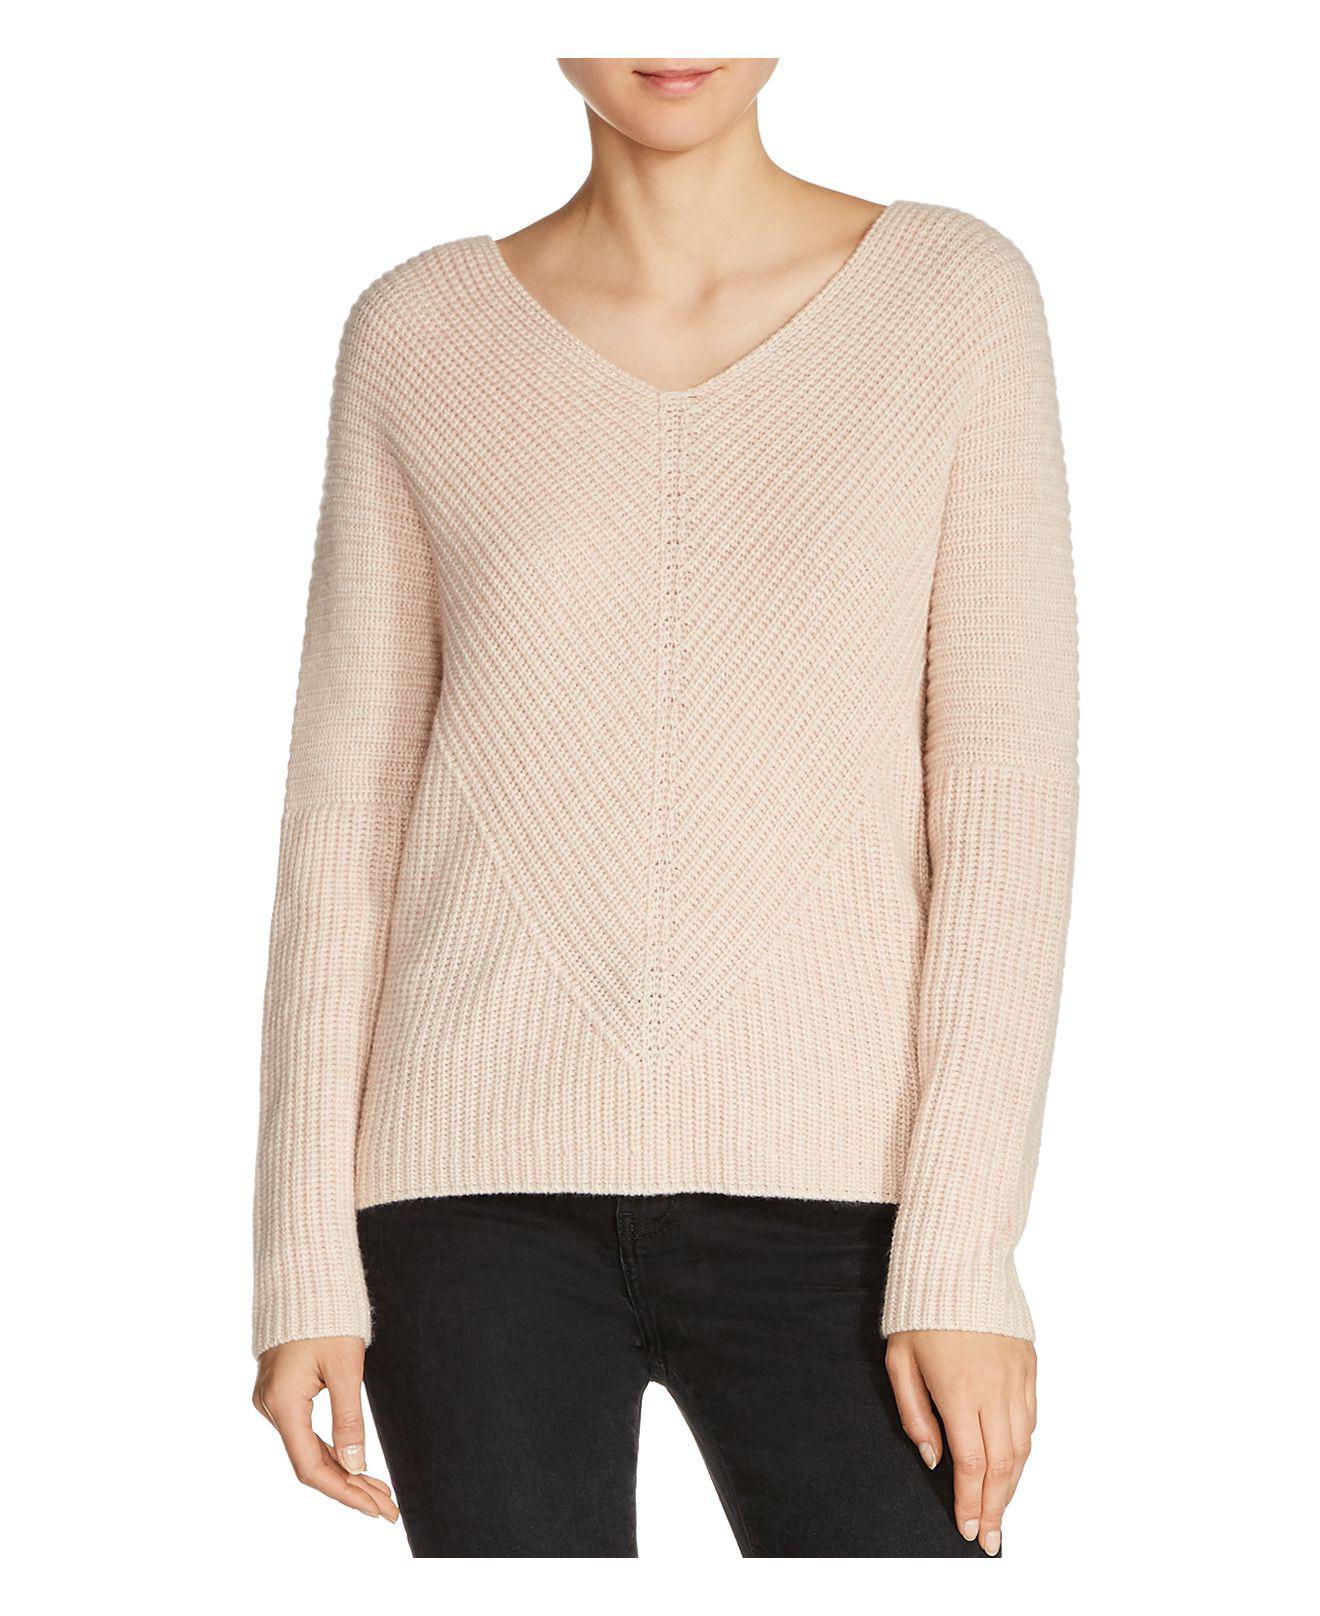 Maje Madina Cashmere Sweater in Natural - Lyst